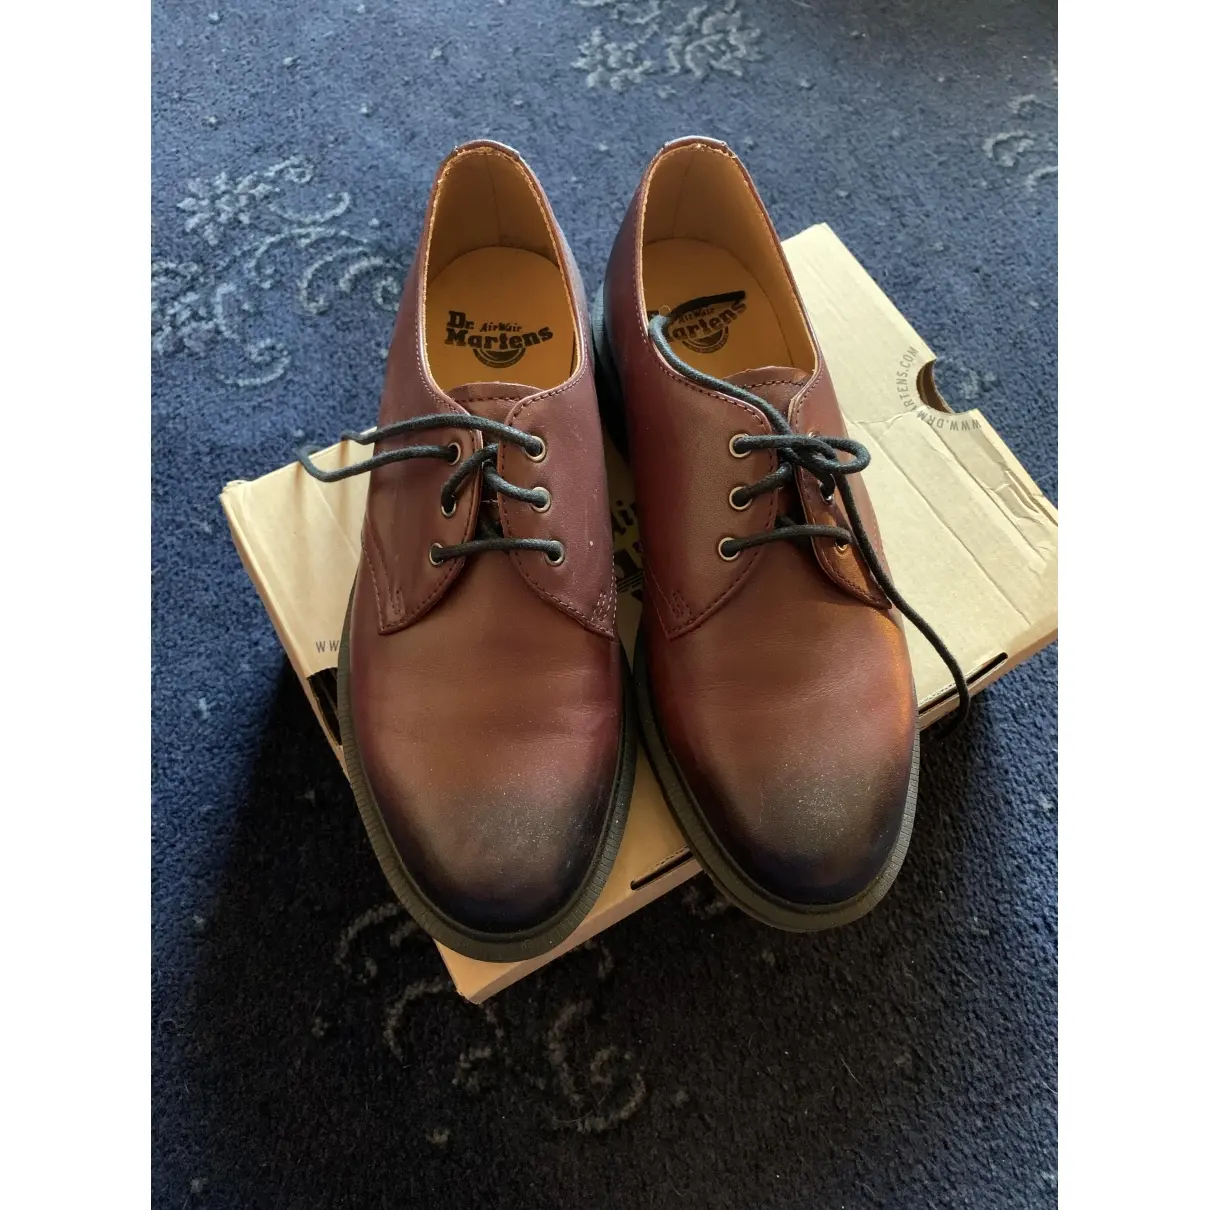 Dr. Martens Leather flats for sale